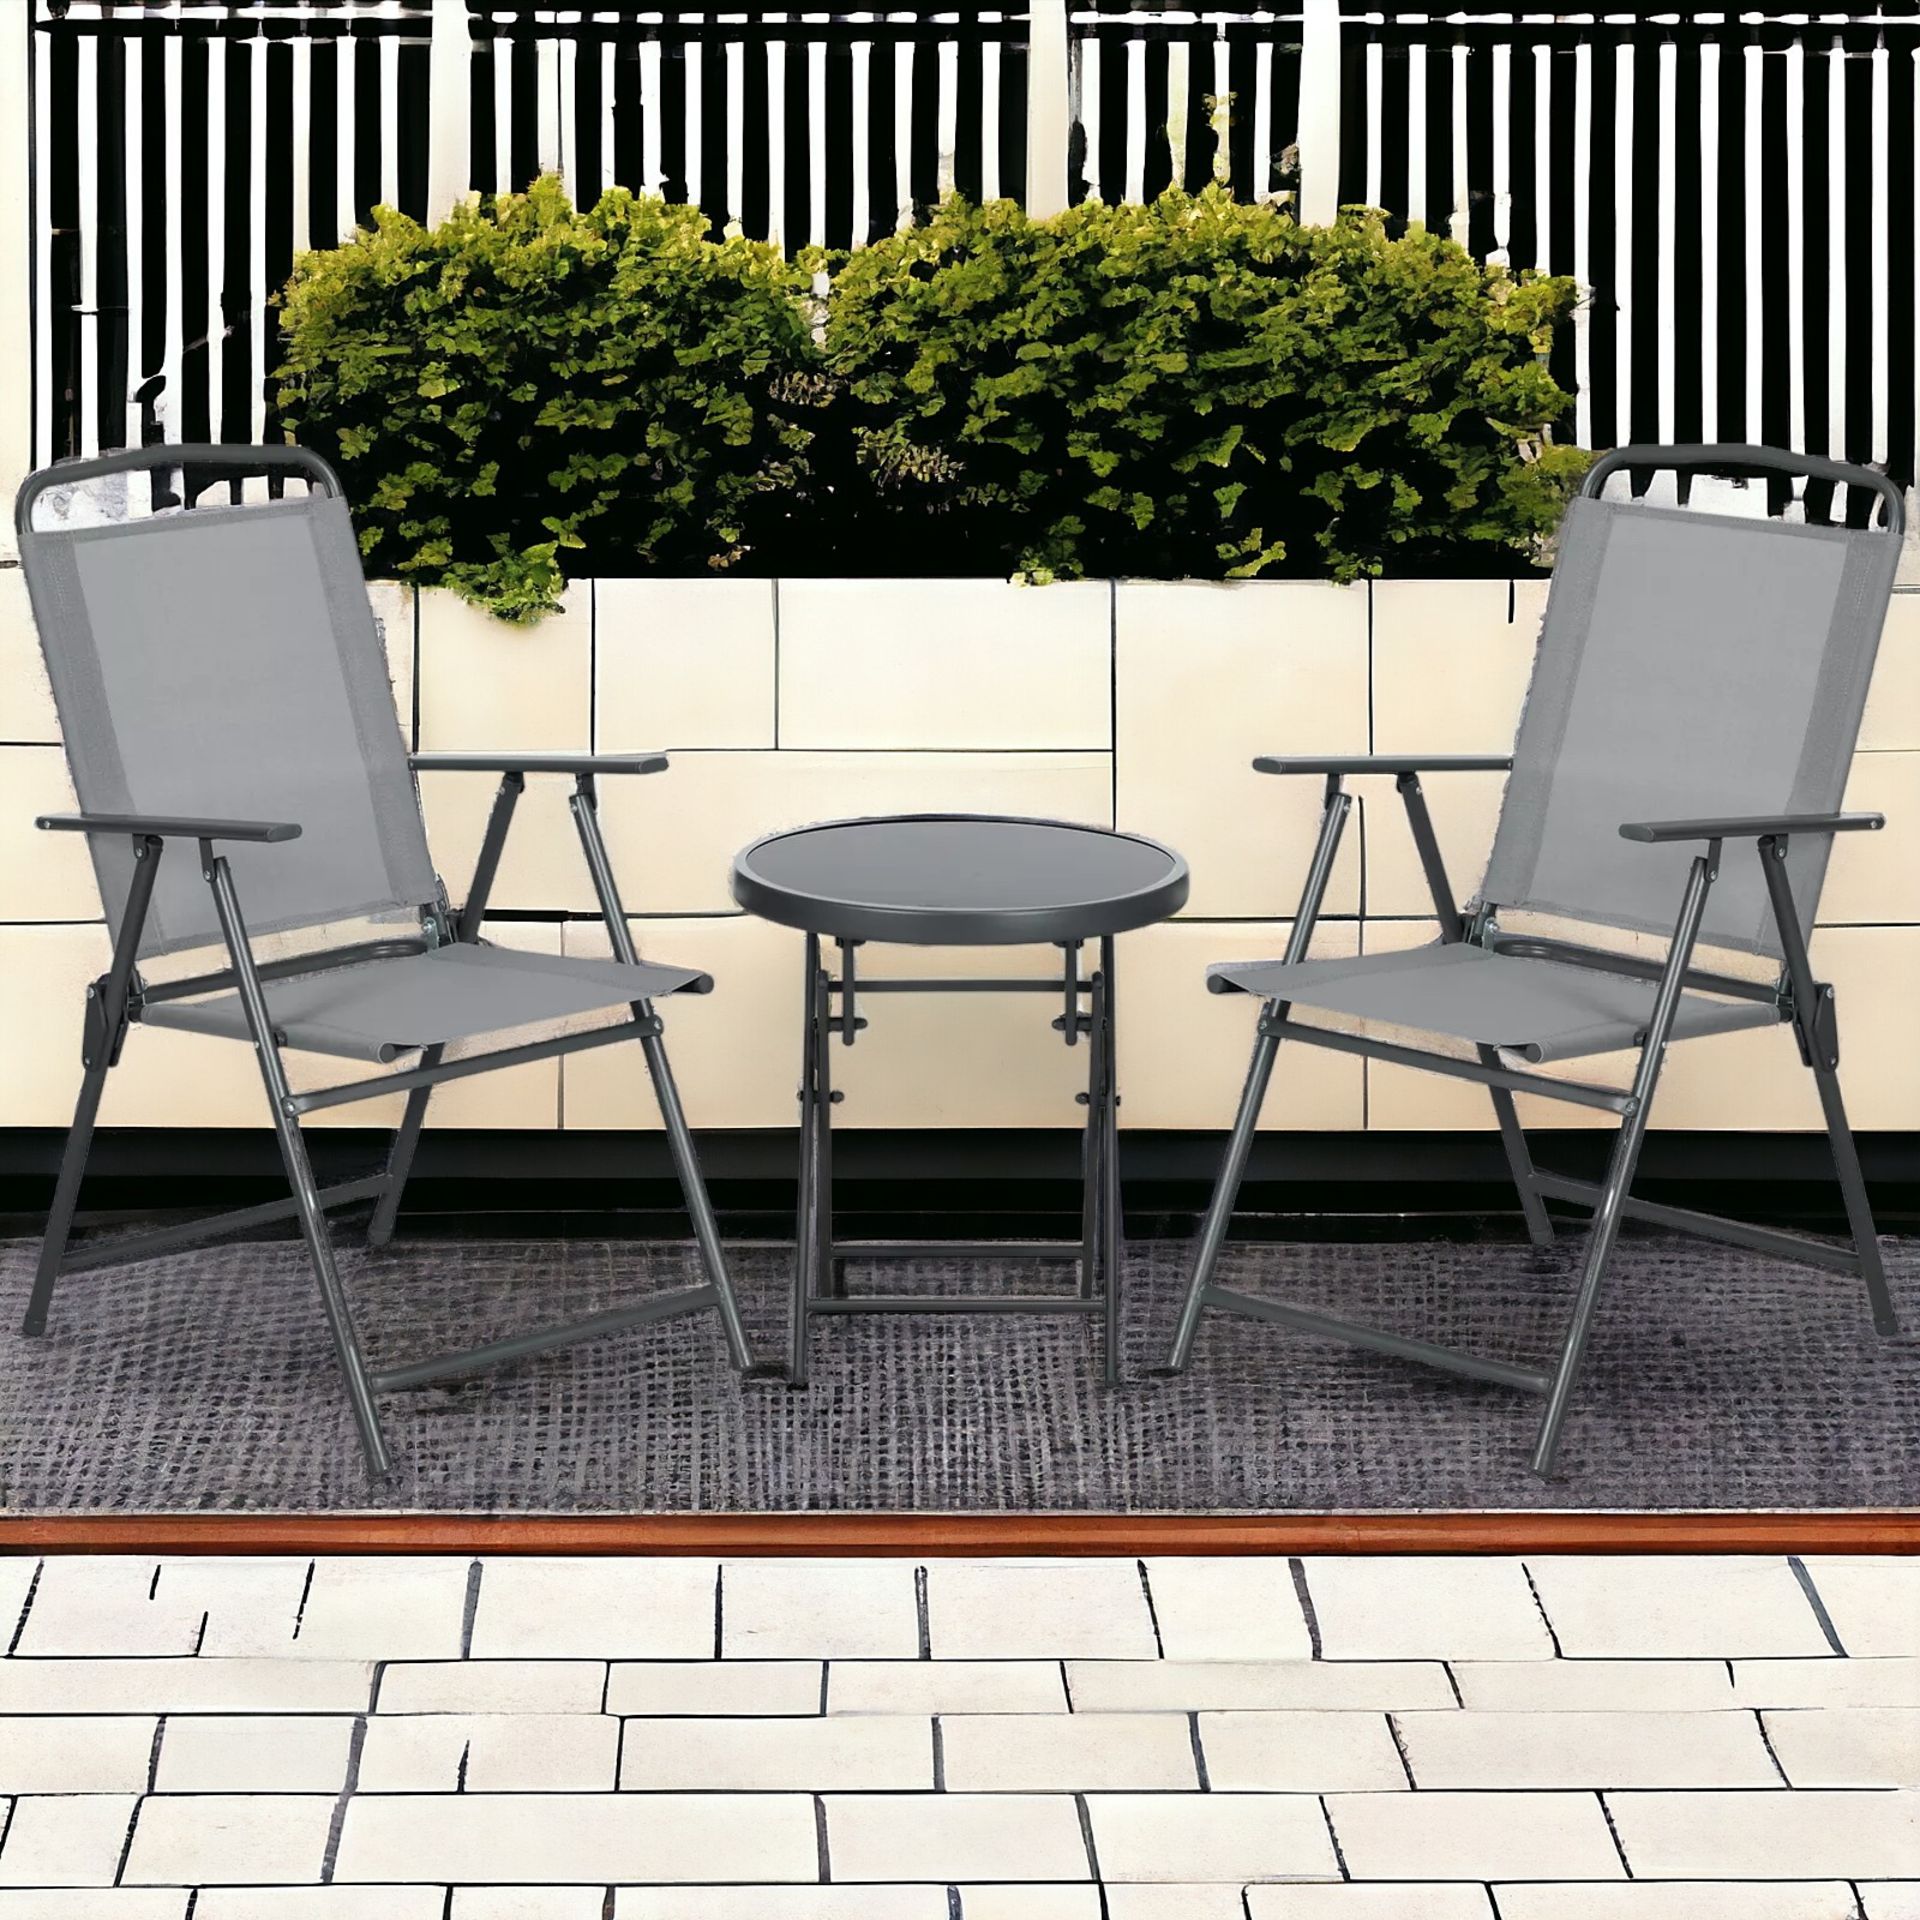 FREE DELIVERY- BRAND NEW PATIO BISTRO SET FOLDING CHAIRS & COFFEE TABLE FOR BALCONY,GREY - Bild 2 aus 2